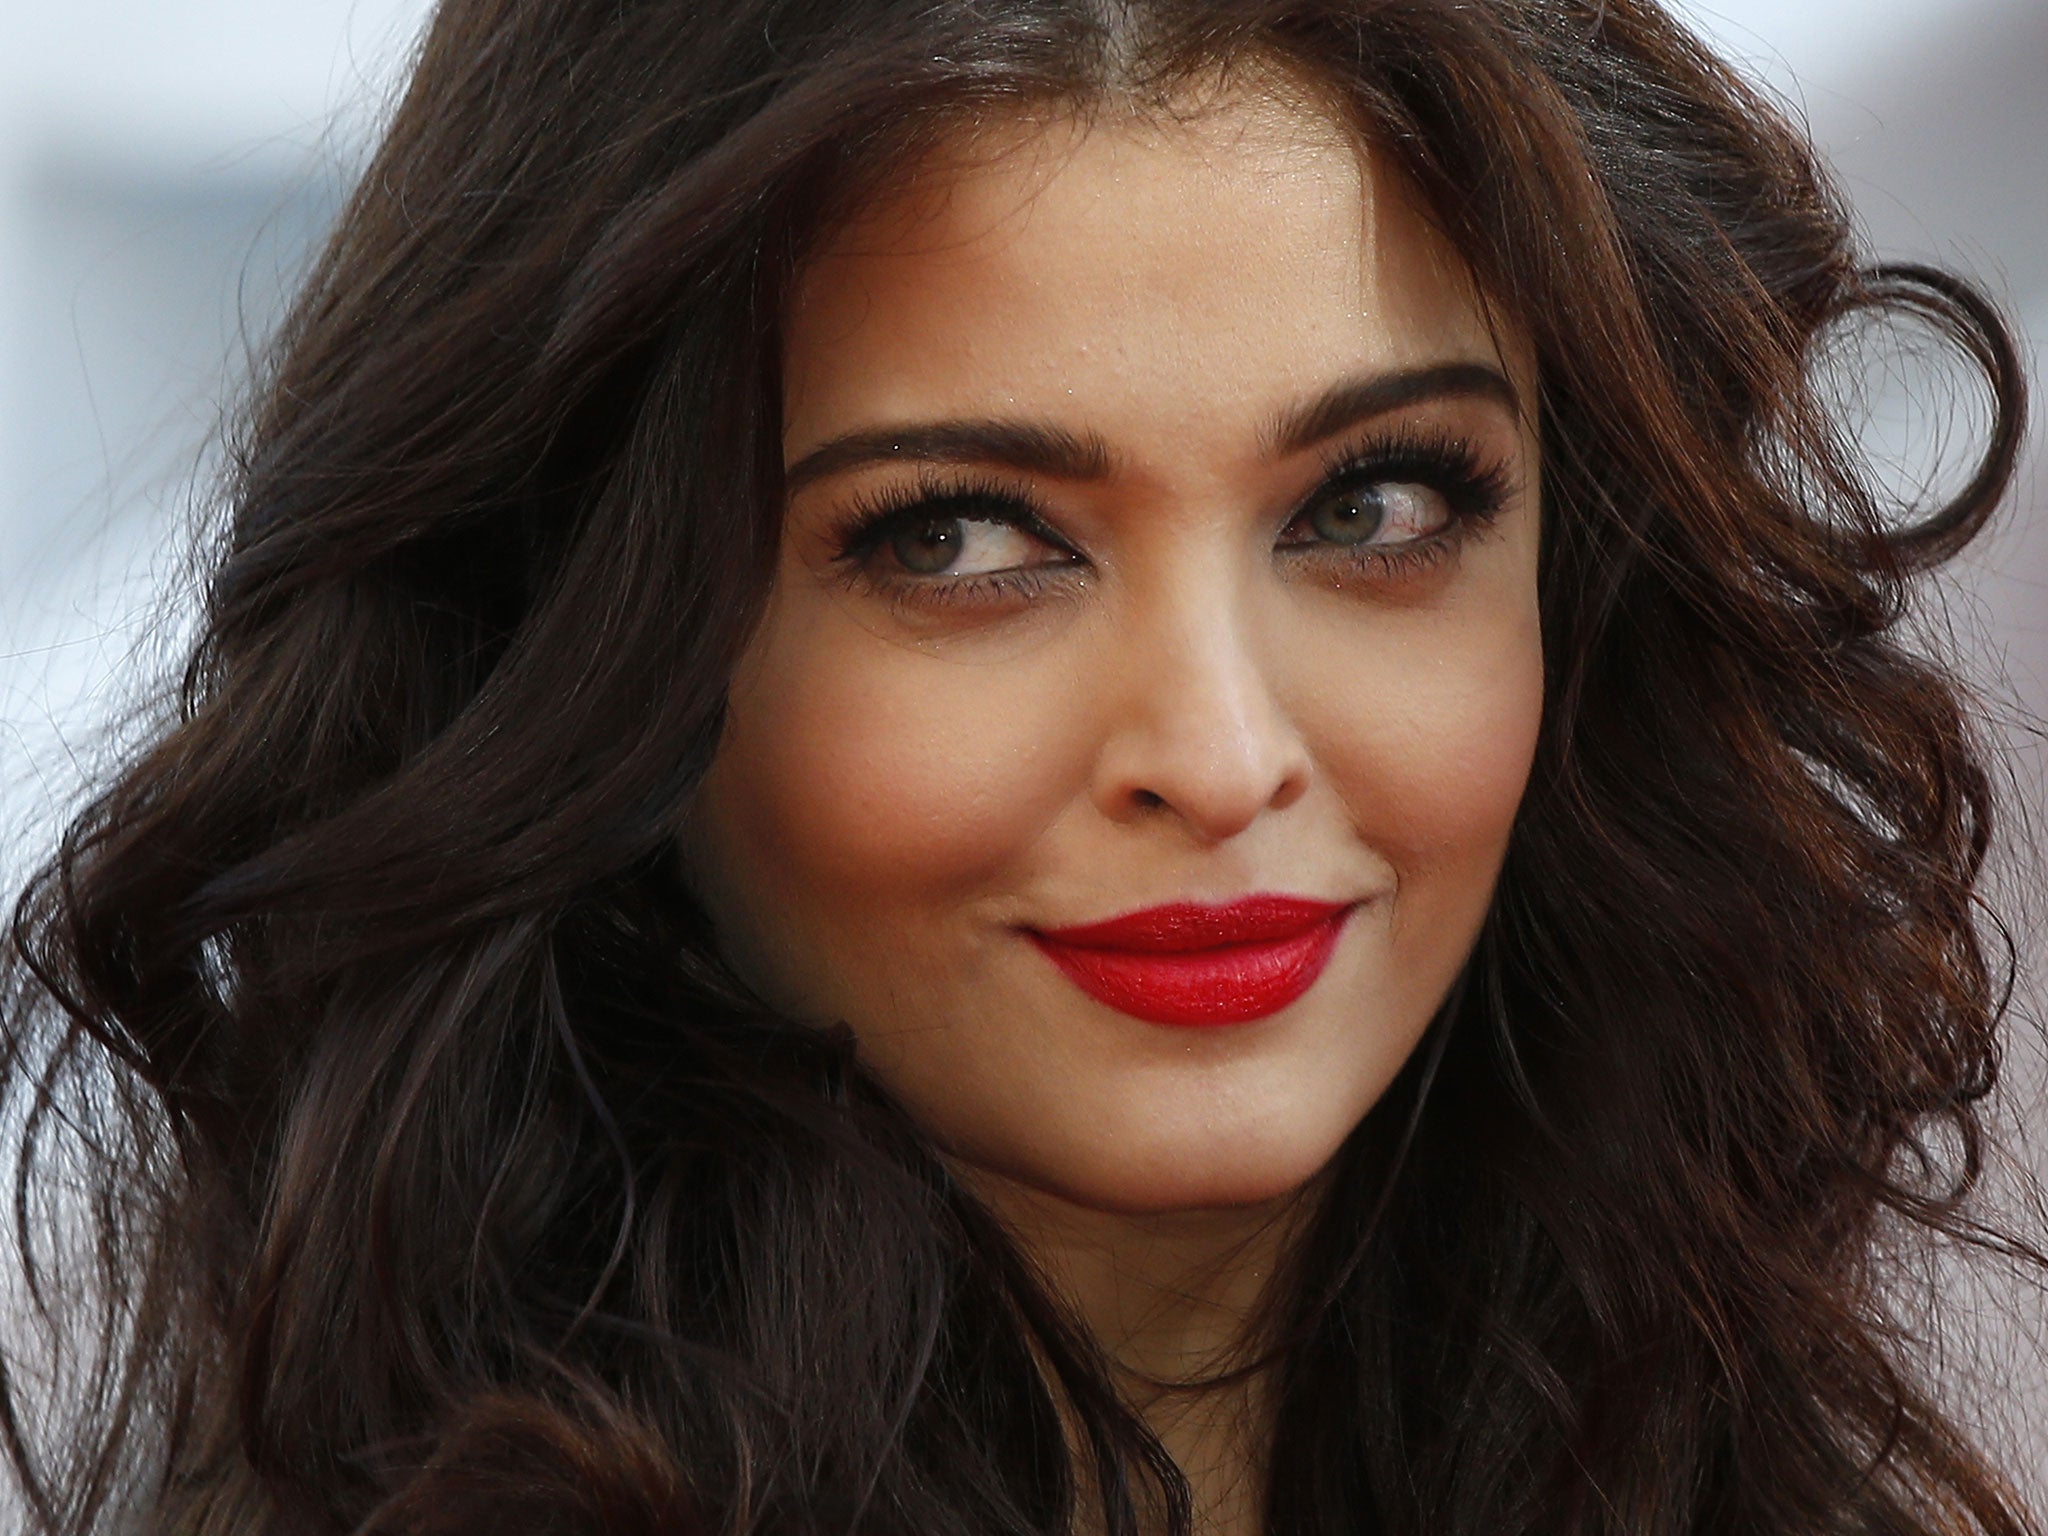 India Aishwarya Rai Sex - Aishwarya Rai Bachchan 'racist' jewellery advert pulled after criticism it  promoted child slavery | The Independent | The Independent